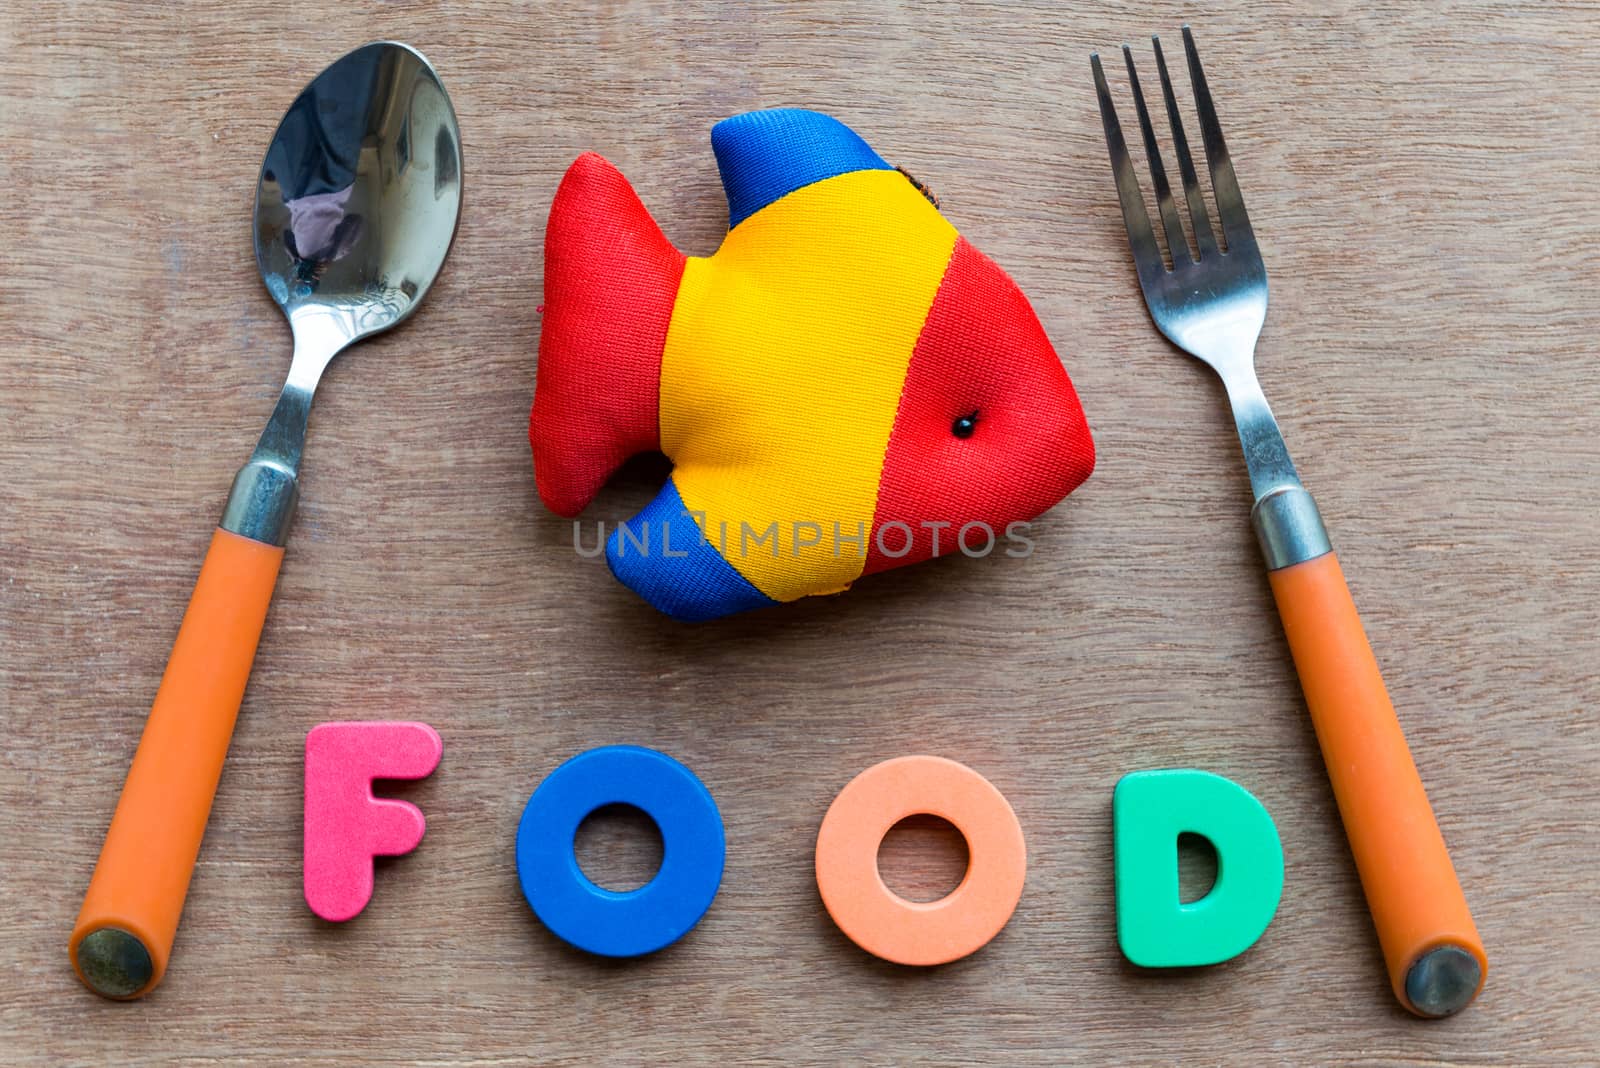 food colorful word on the wooden background